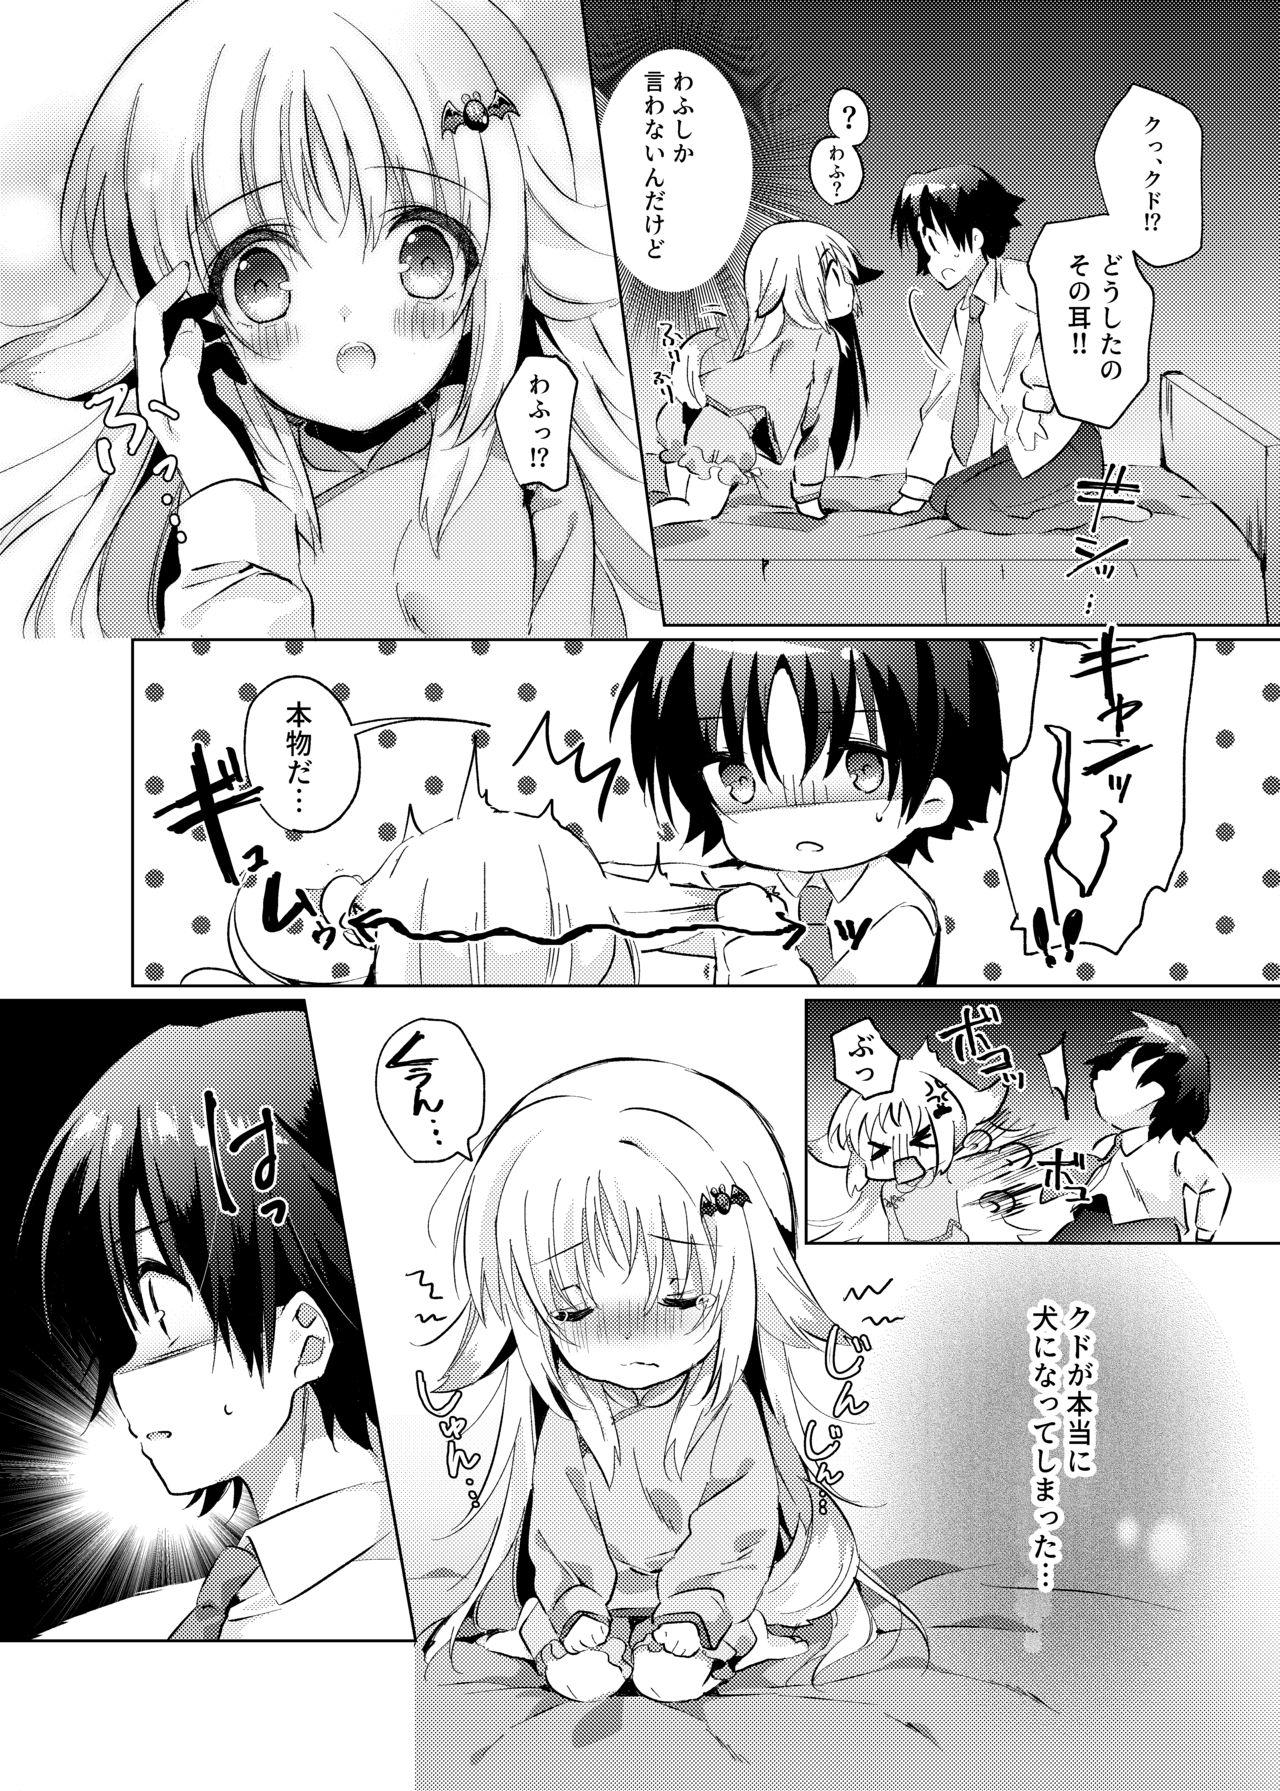 Office クドがわんちゃんになって好きにされちゃう本 - Little busters Gay Natural - Page 4